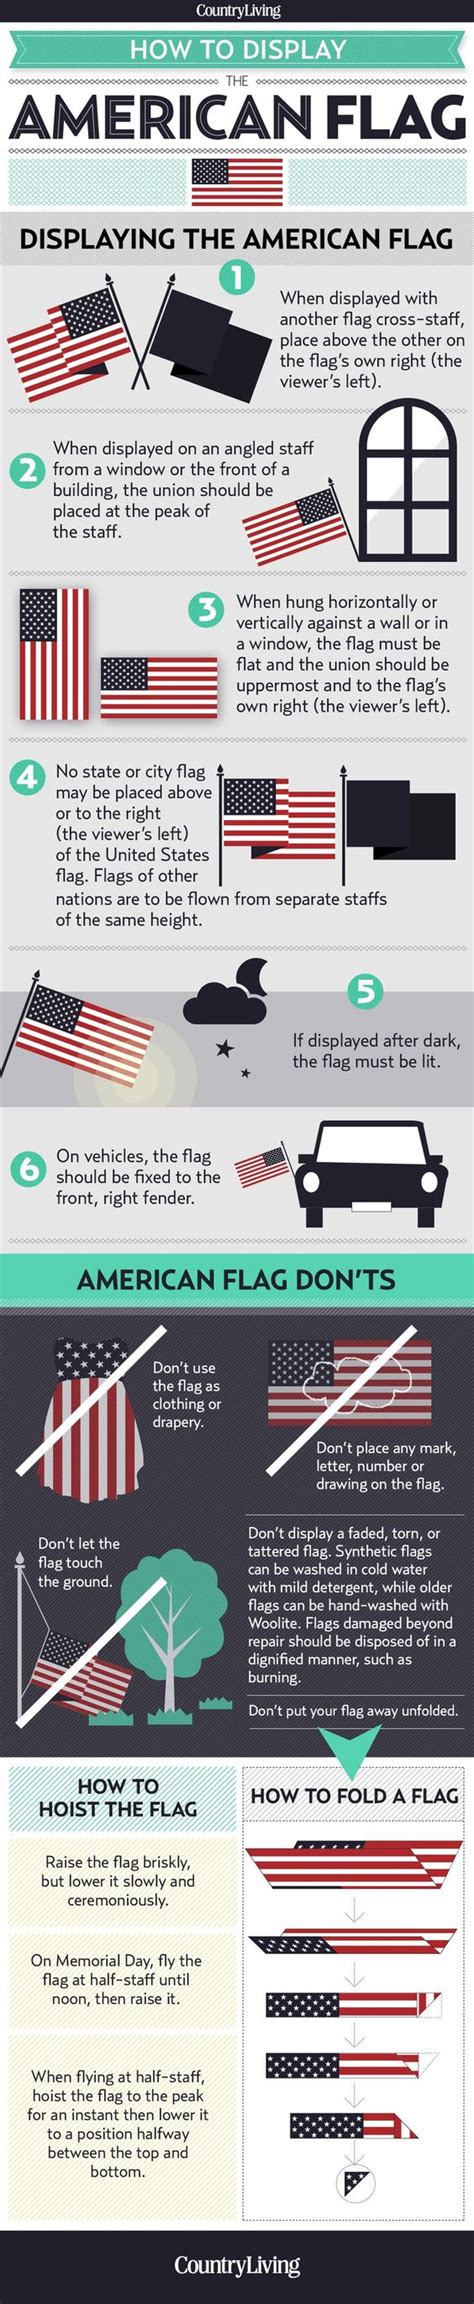 Do You Know How To Properly Display The American Flag Displaying The